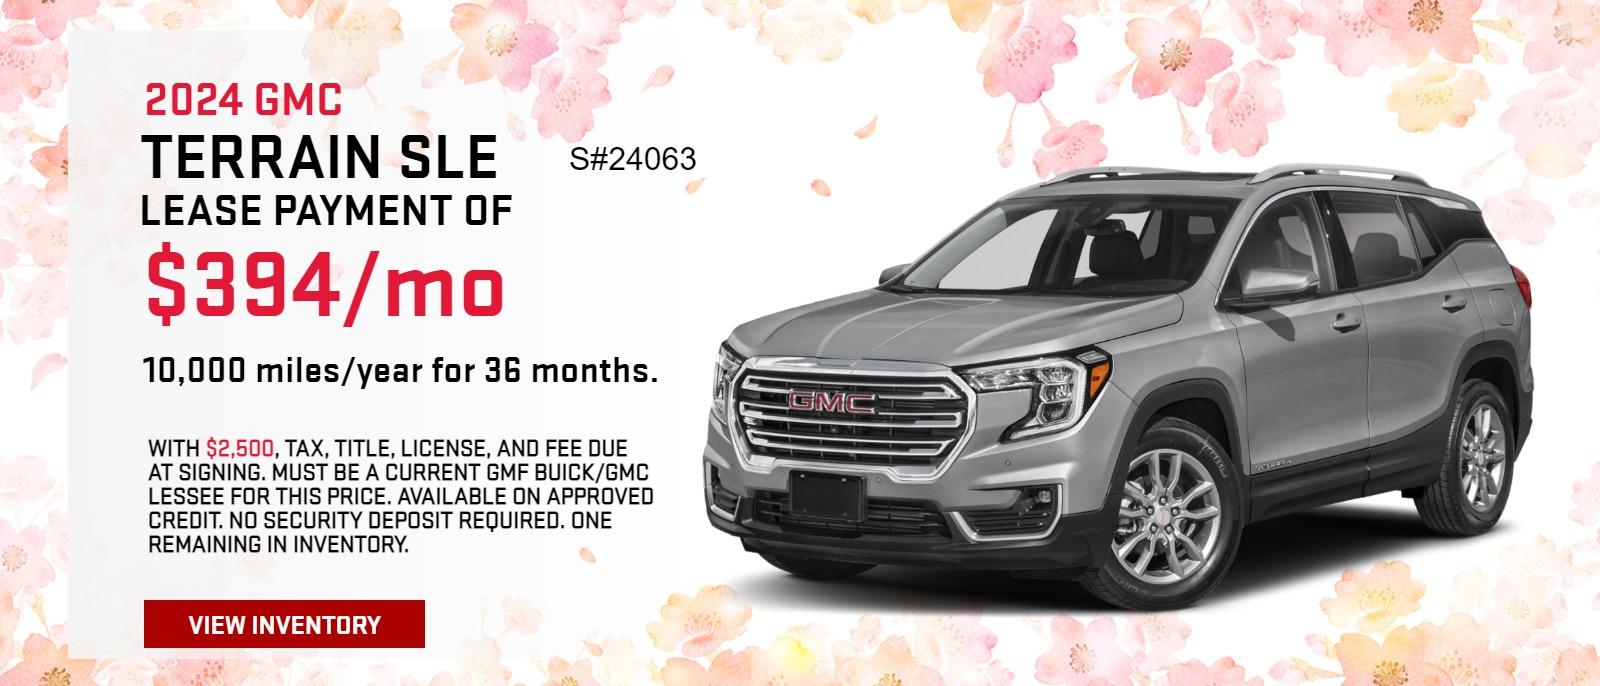 S#24063
2024 GMC TERRAIN
LEASE PAYMENT OF $394/MO 
WITH $2500, TAX, TITLE, LICENSE, AND FEE DUE AT SIGNING. MUST BE A CURRENT GMF BUICK/GMC LESSEE FOR THIS PRICE. MUST TAKE DELIVERY BY 4/30/24